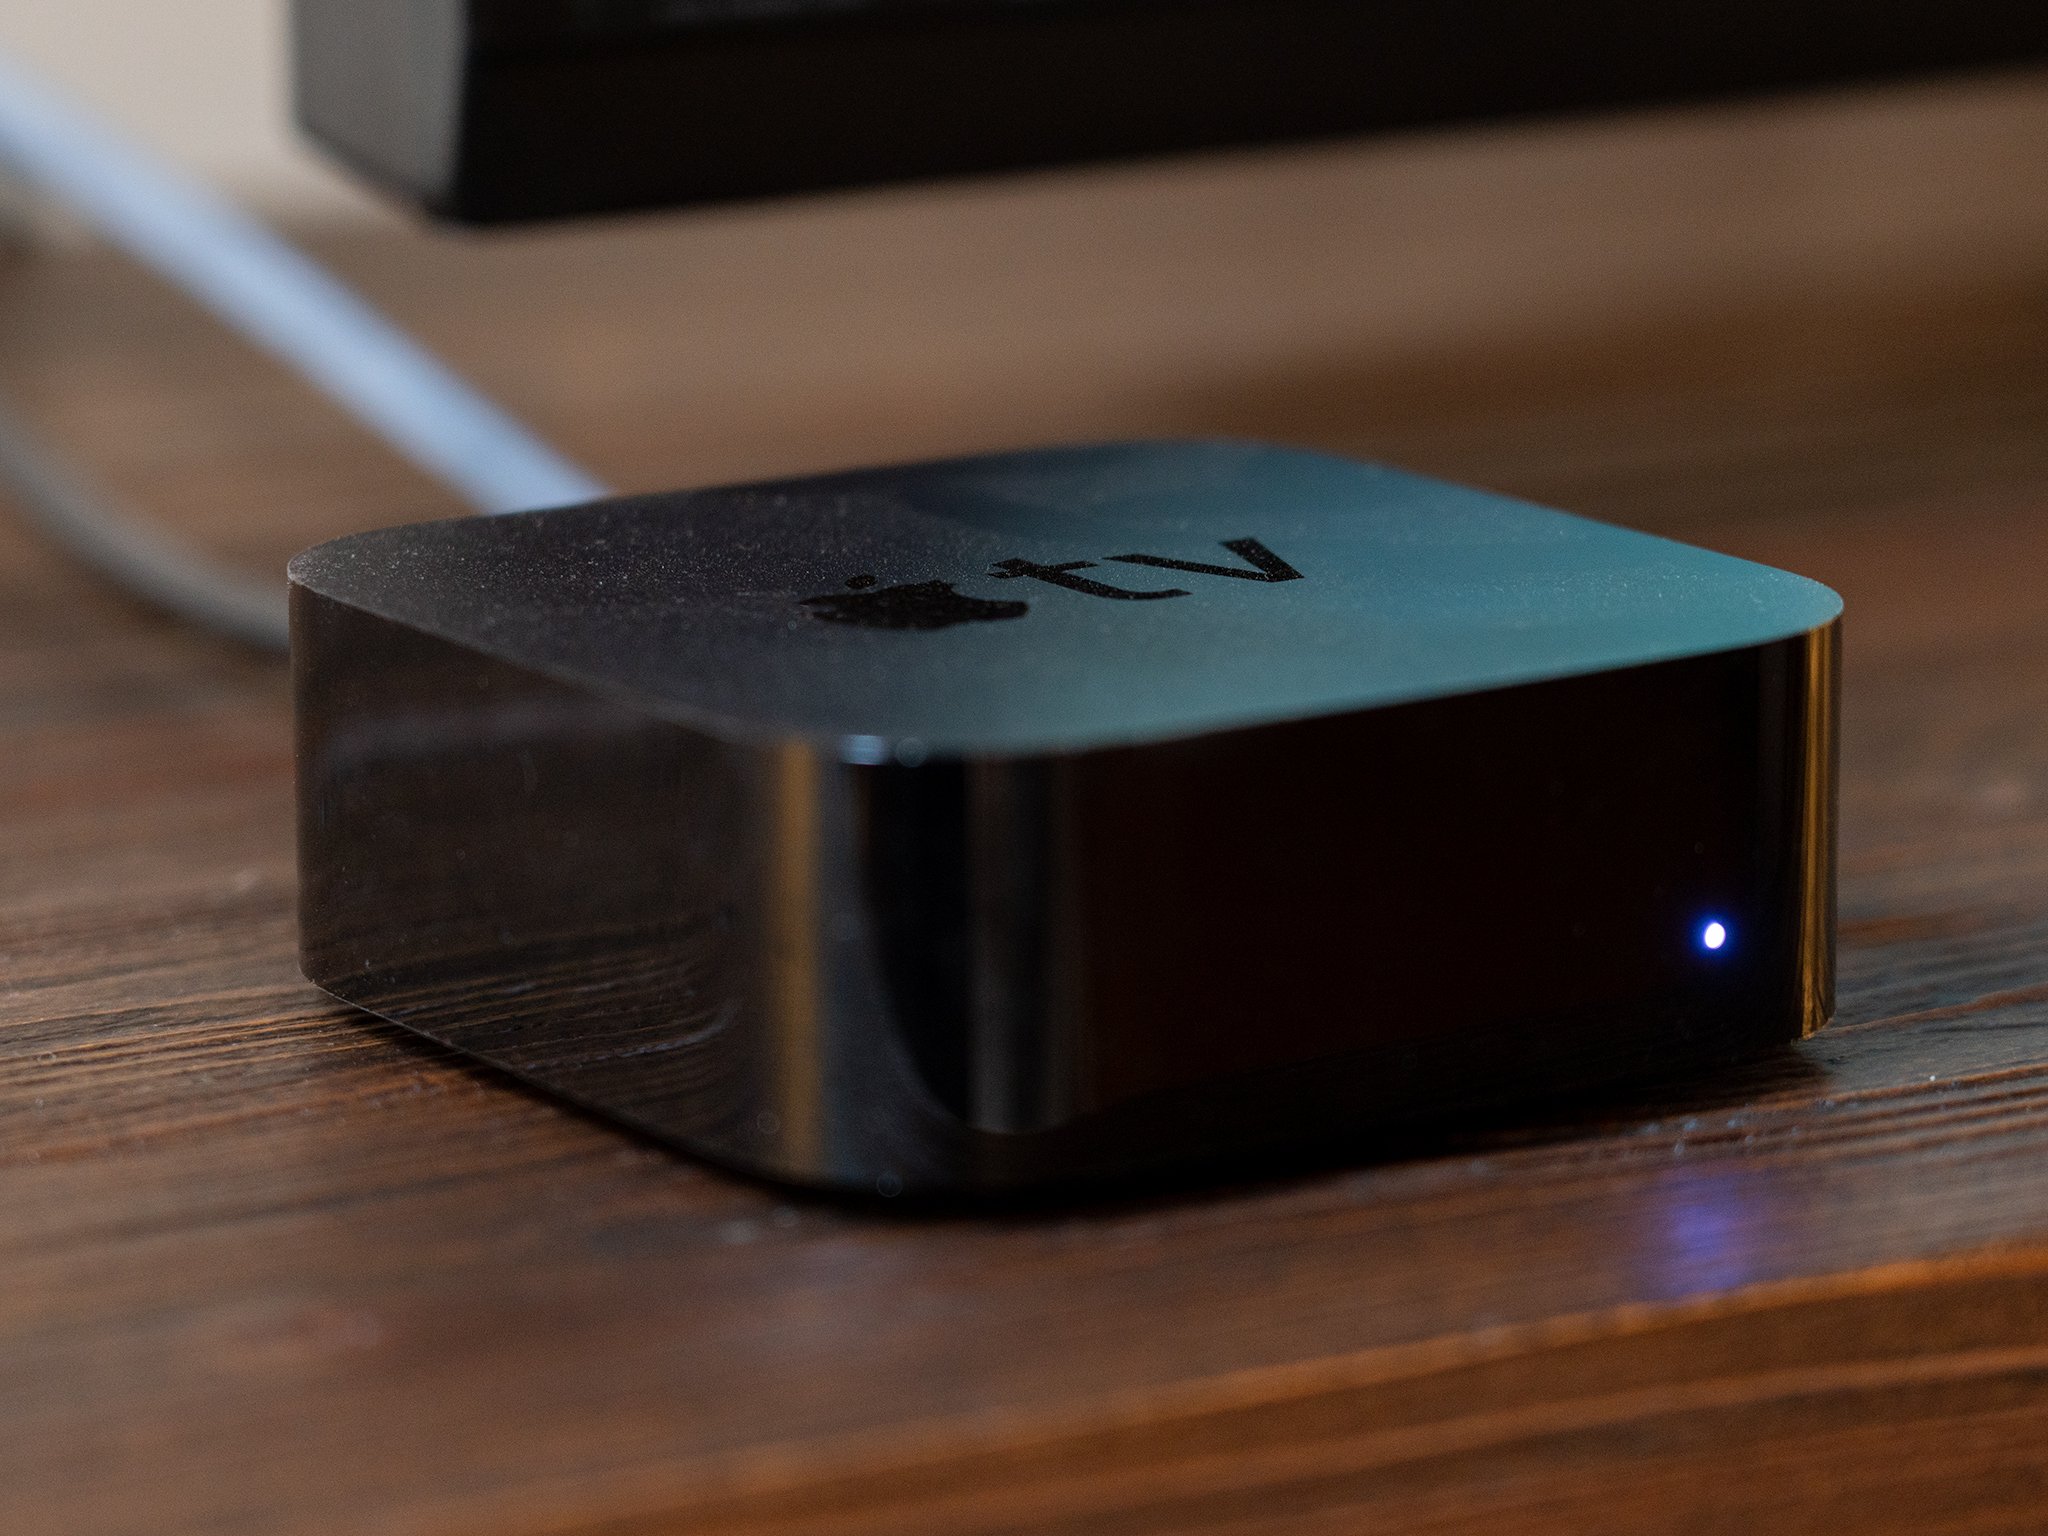 How to find your Apple TV's serial number